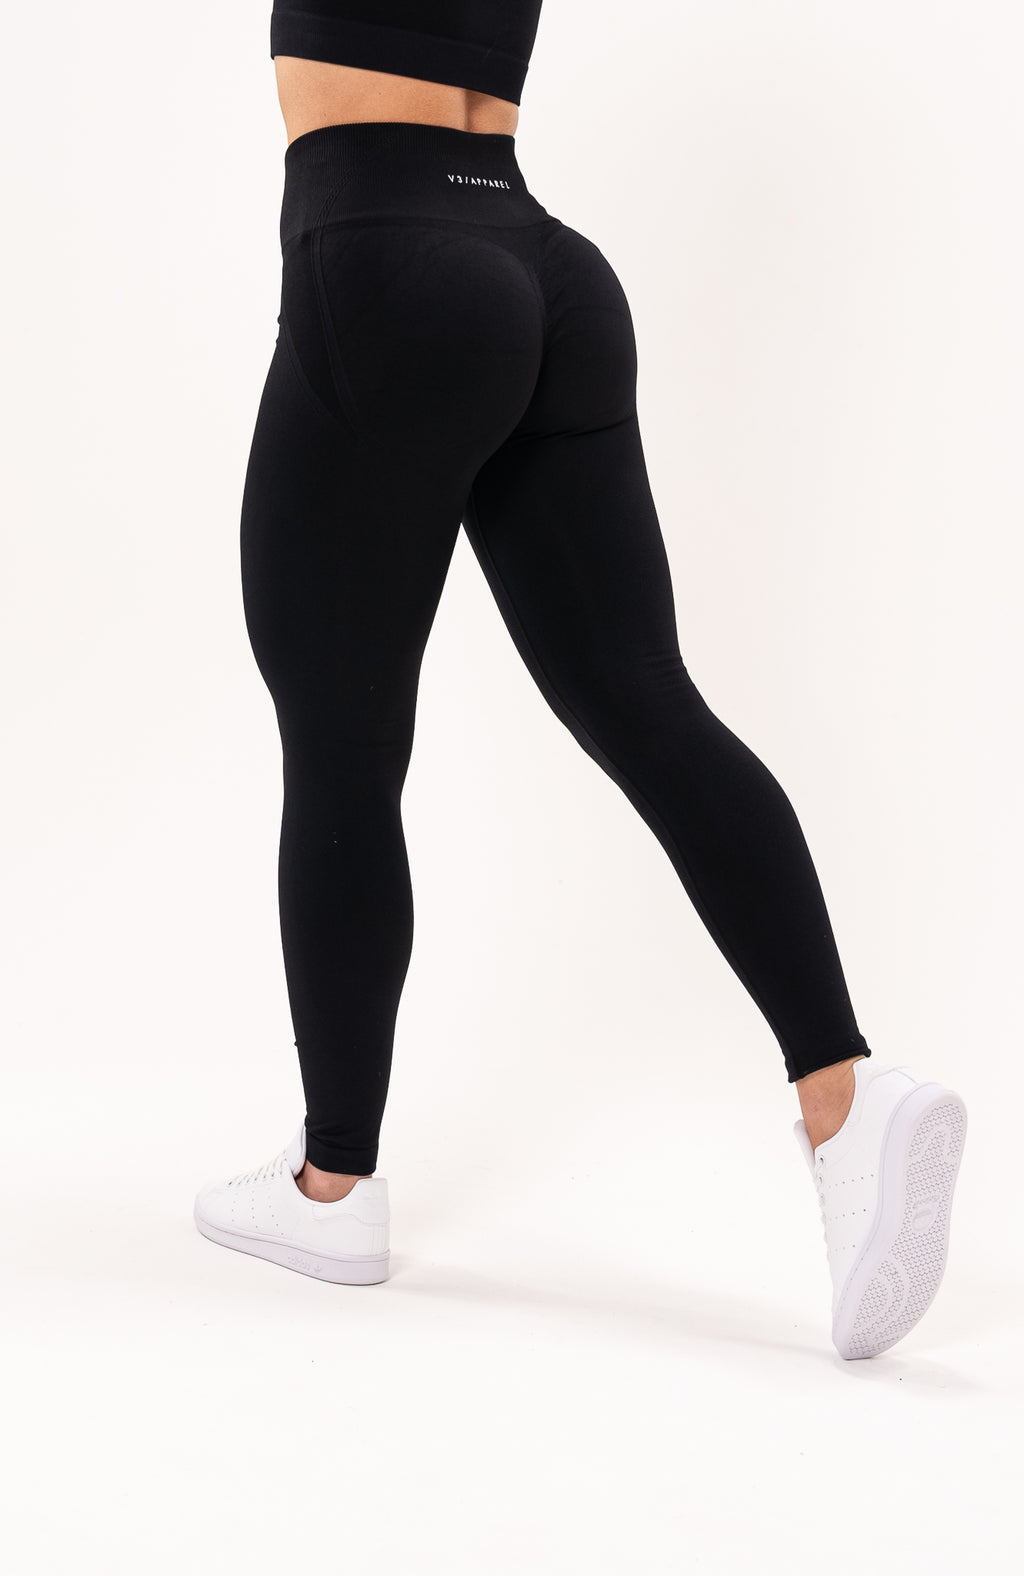 Basic Shaping Hip Sports Tights Sexy Seamless Fitness Leggings Gym